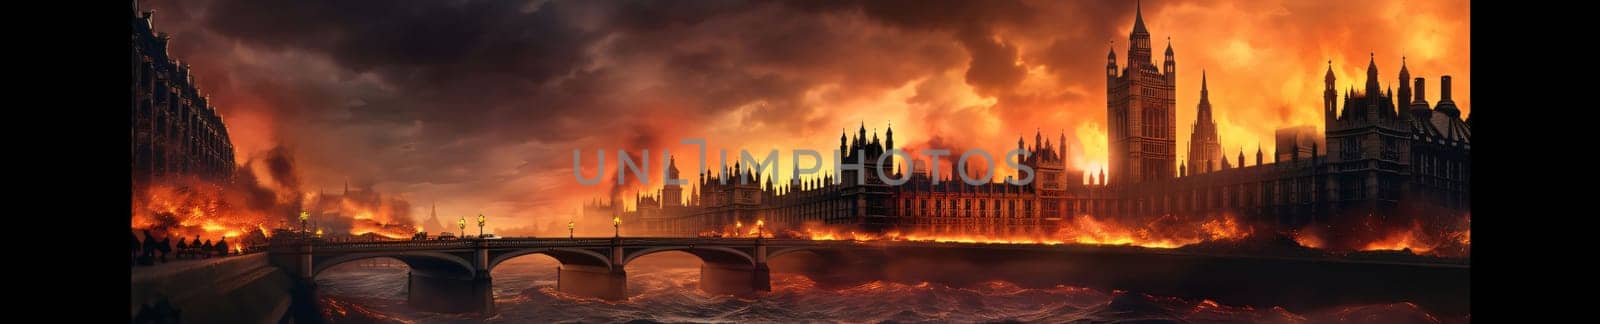 Big Ben and Houses of Parliament in a fire, London, UK by ThemesS